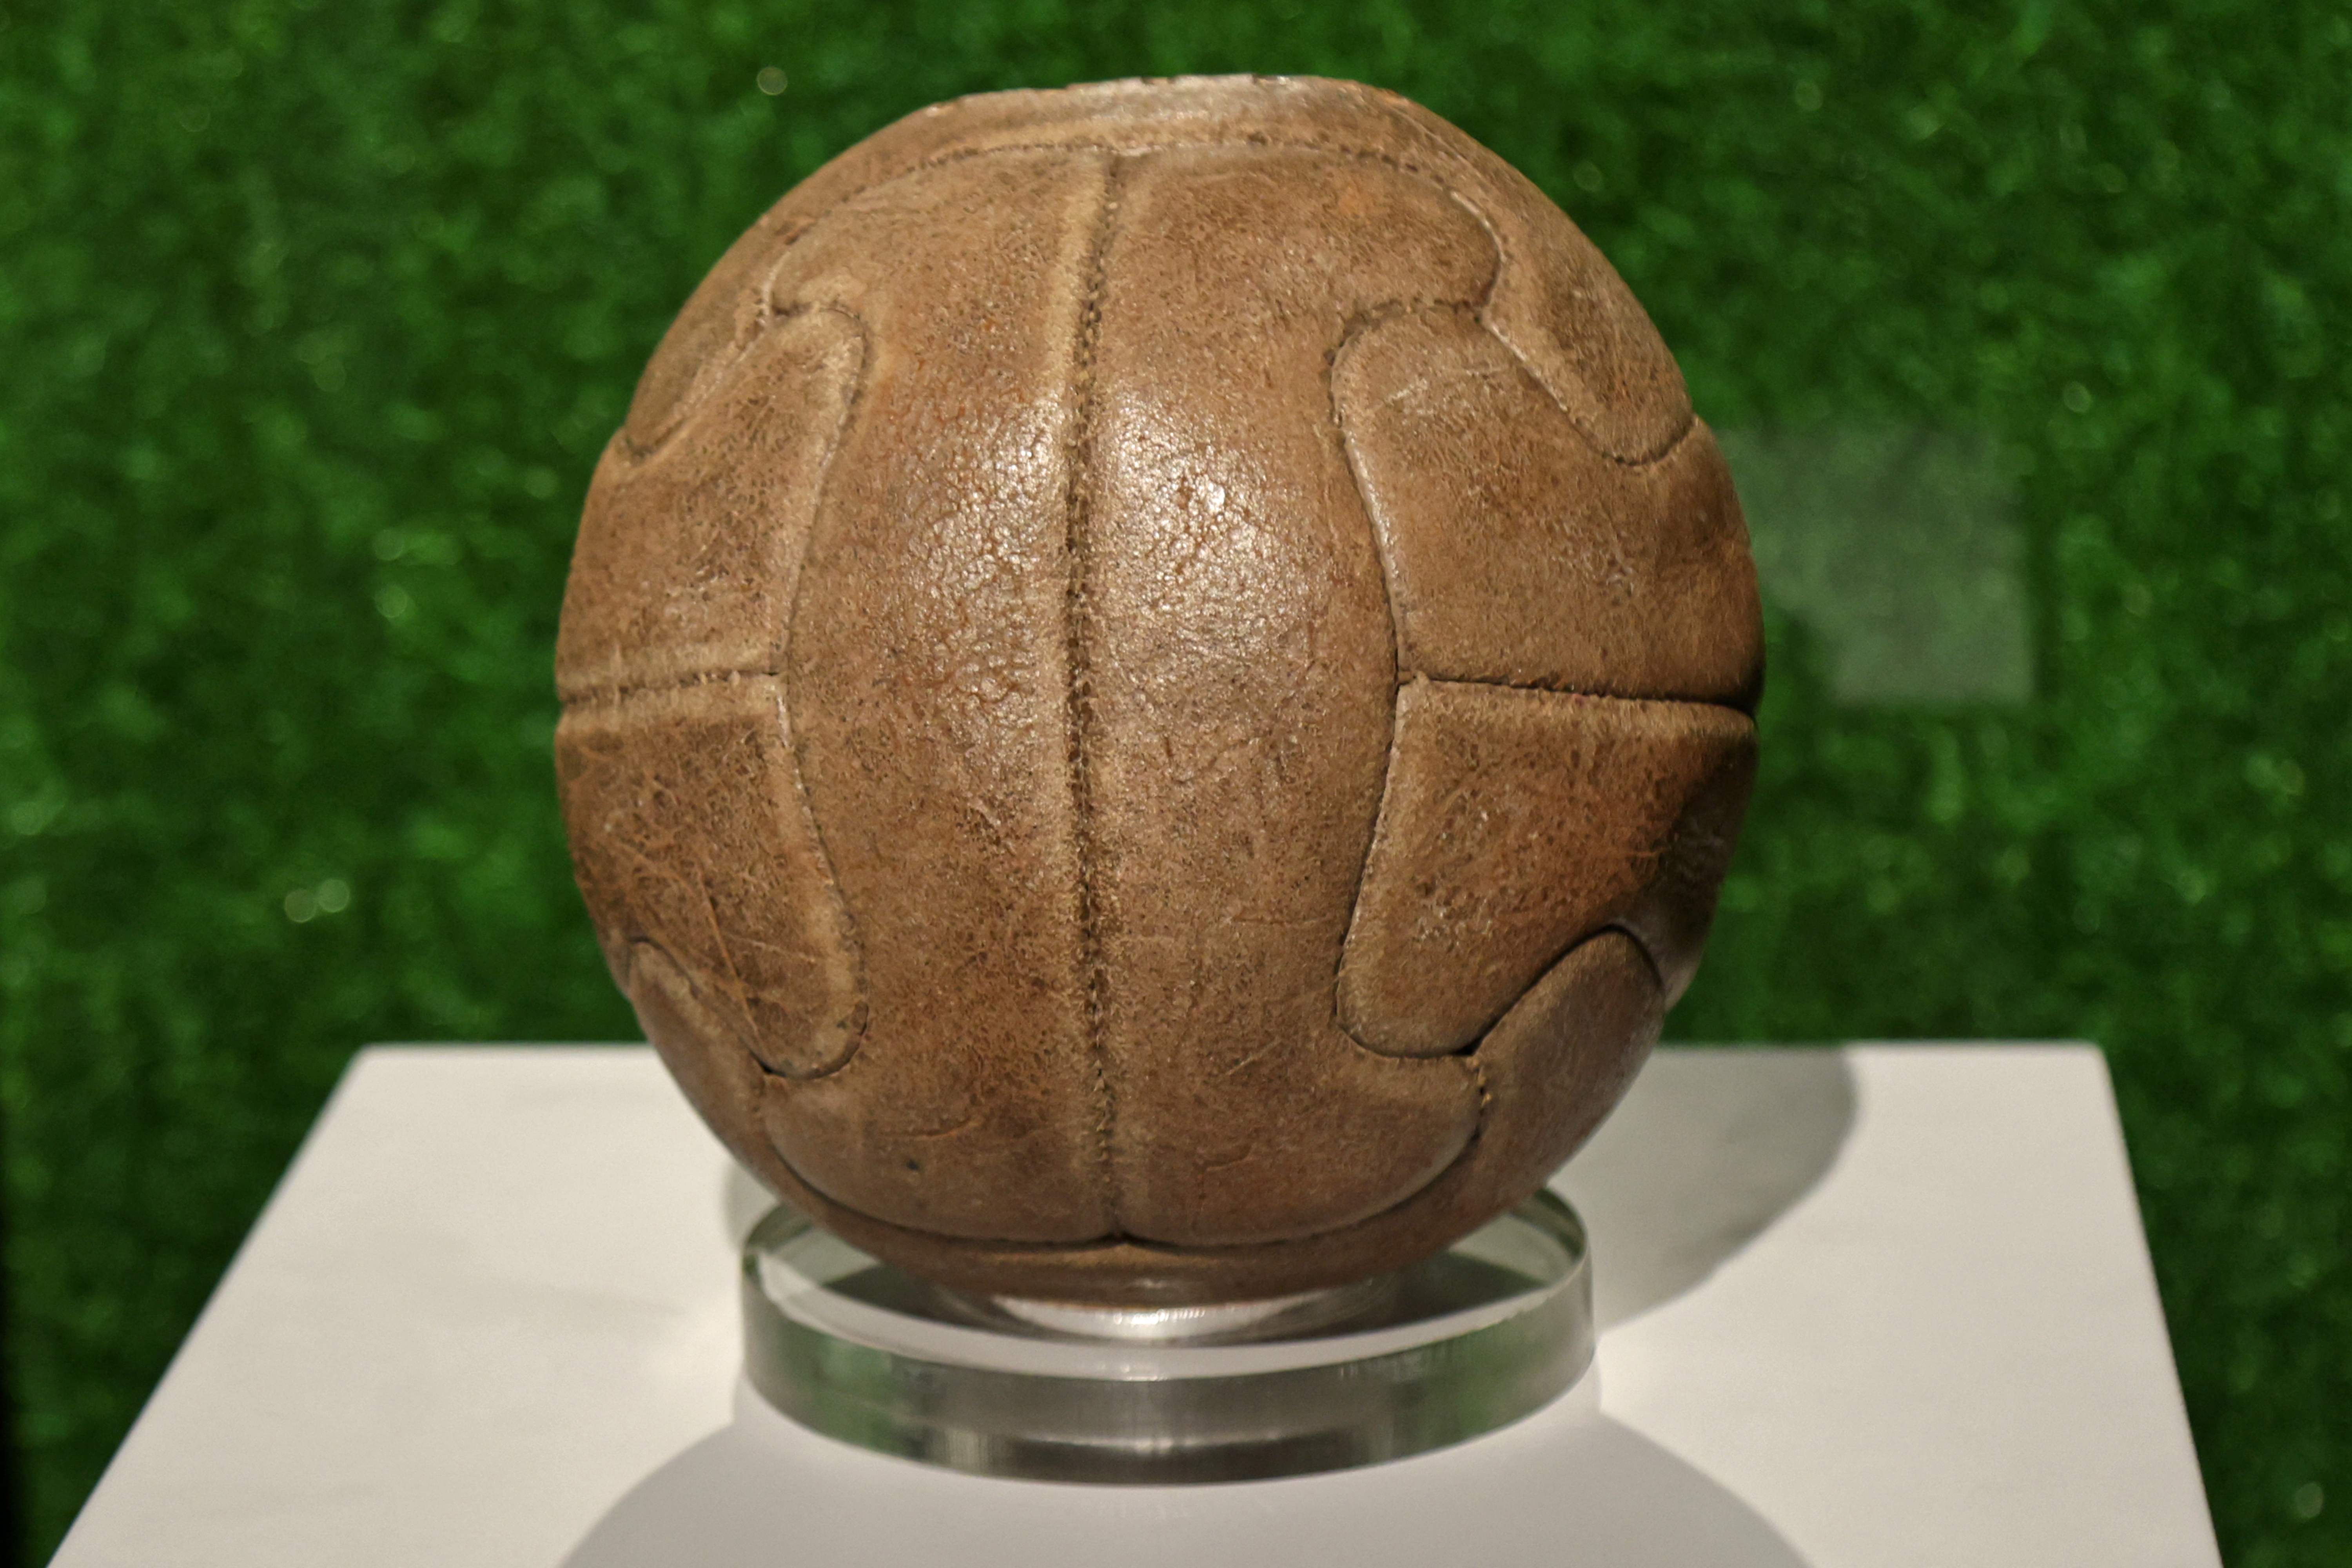 The Game-Used Ball From the 2022 World Cup Final Is Headed to